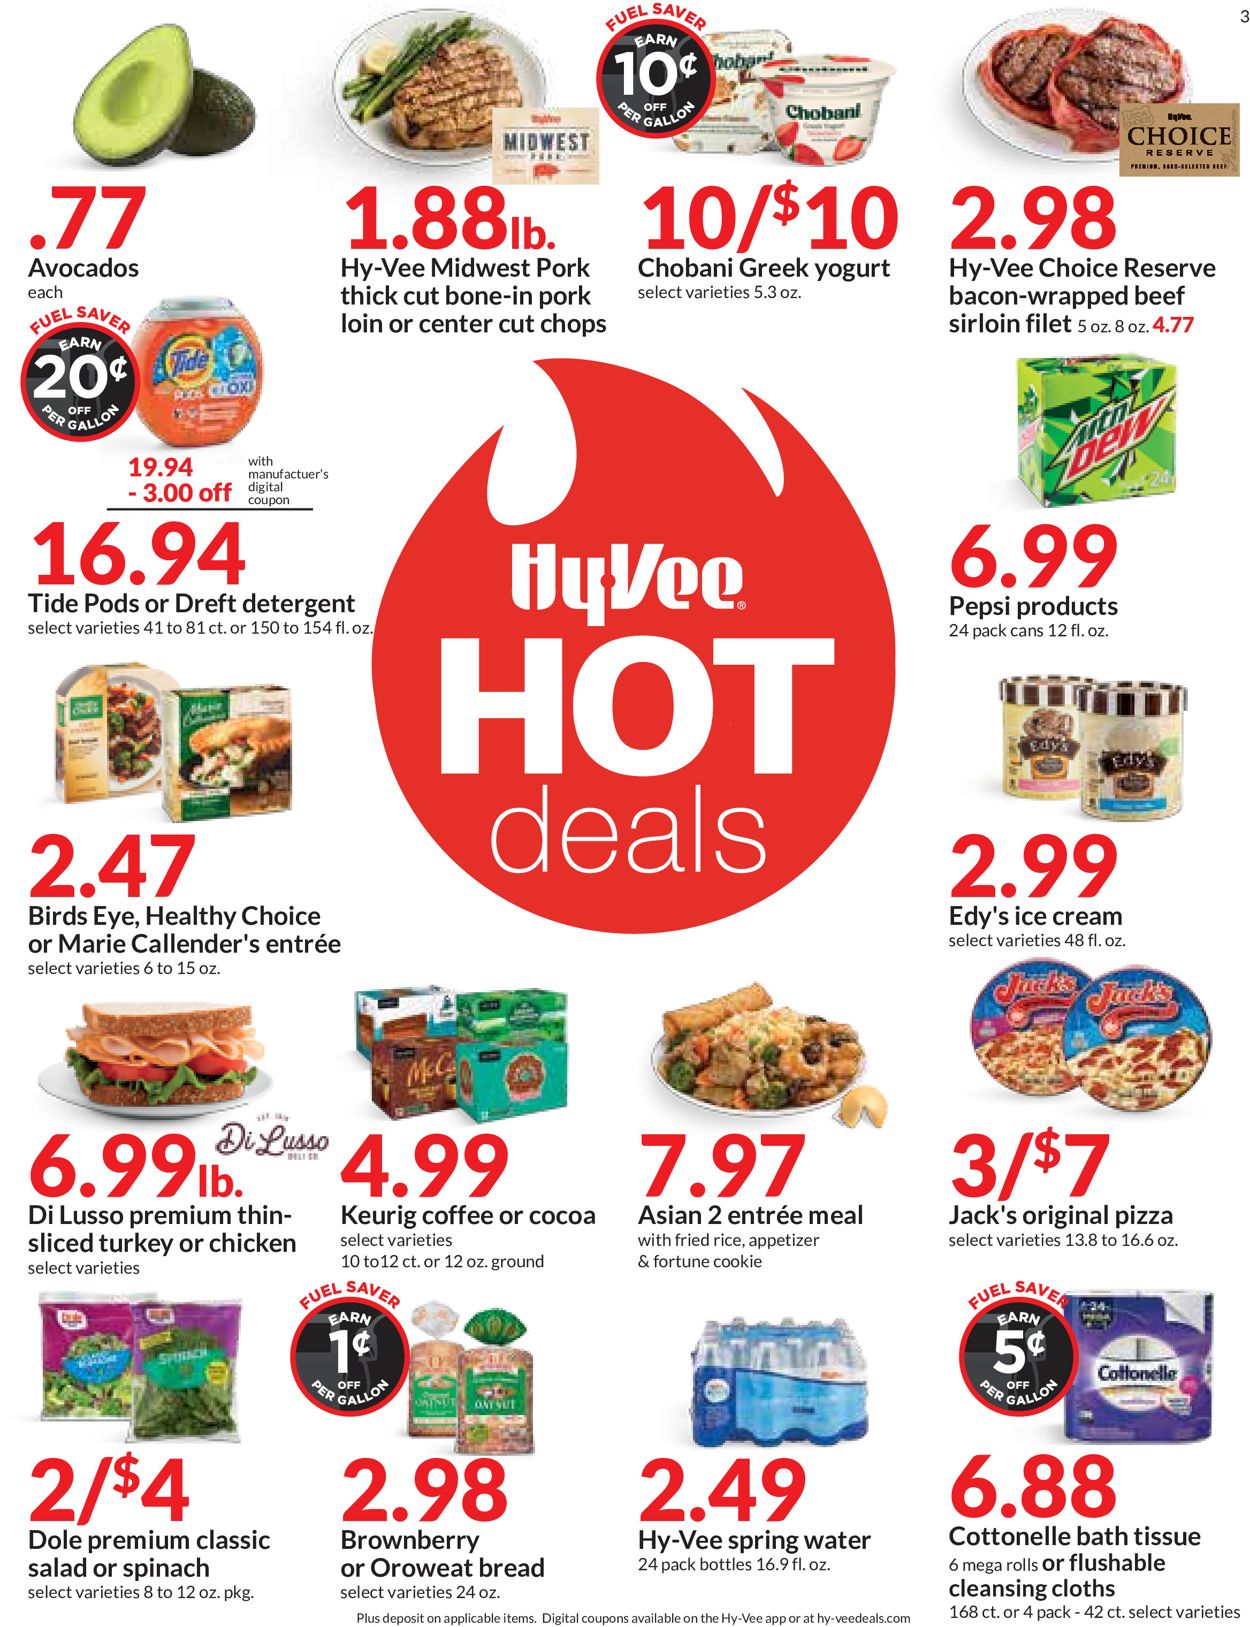 HyVee Current weekly ad 07/07 07/13/2021 [3]